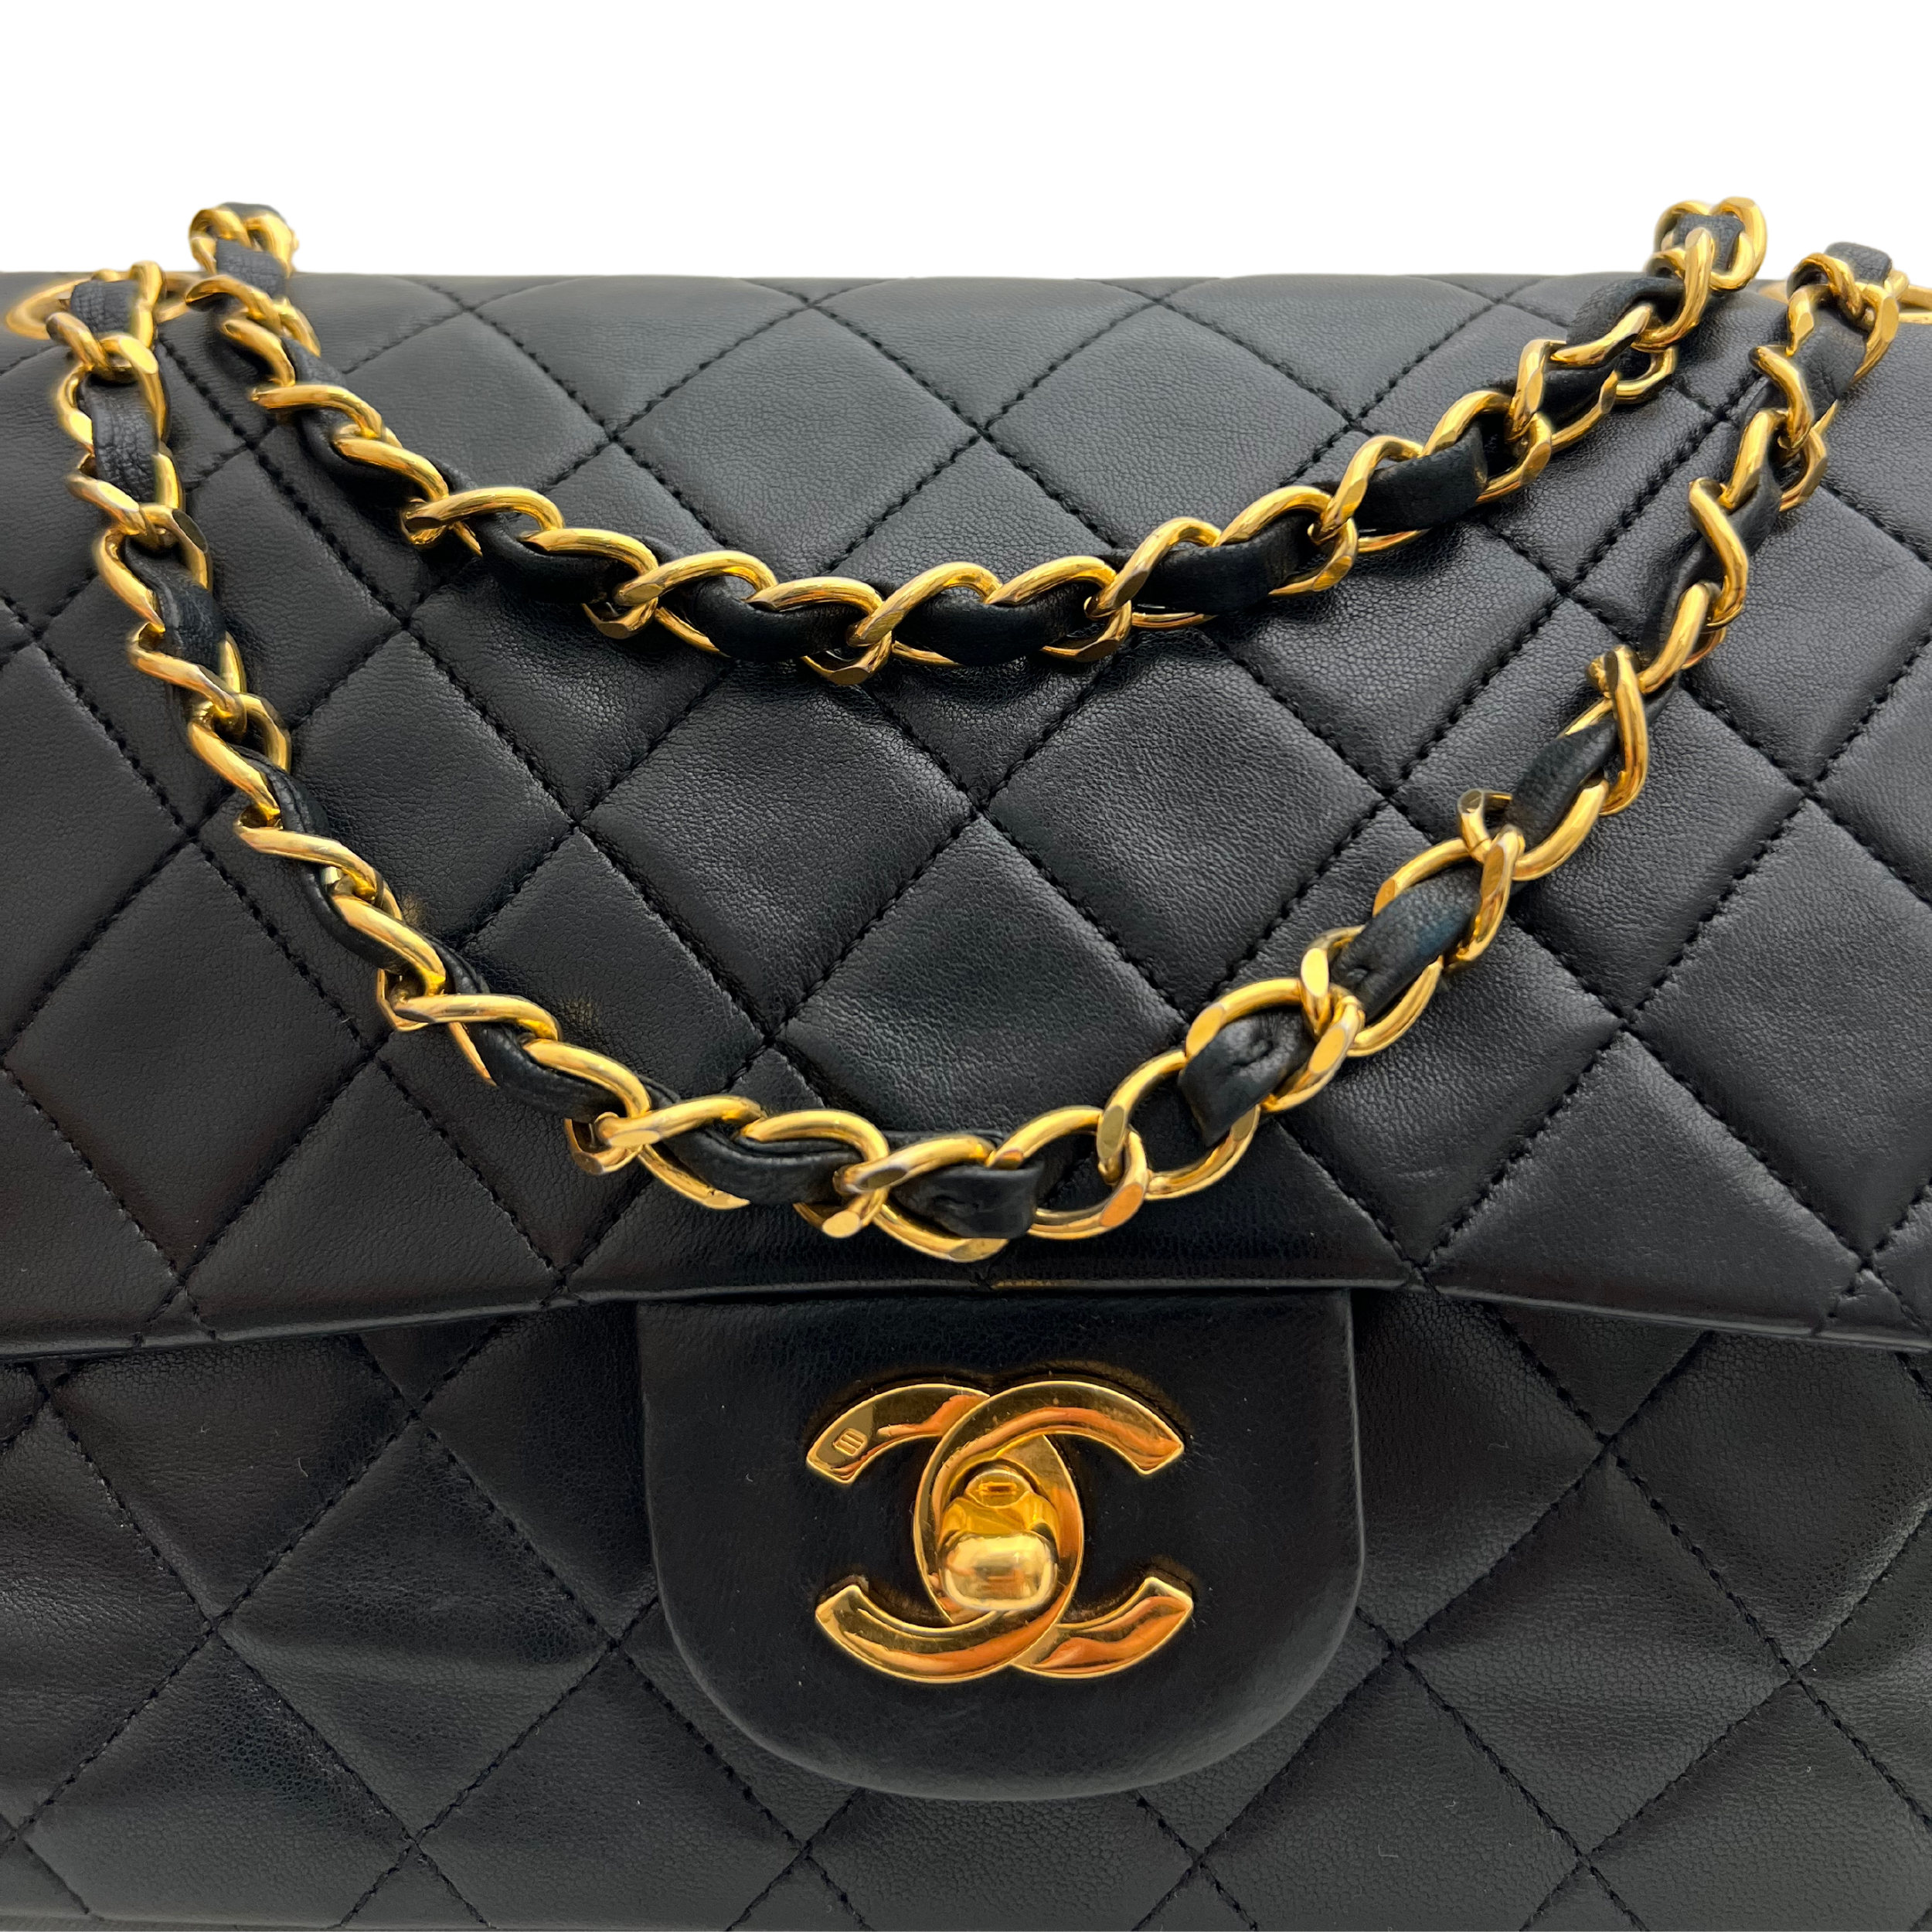 CLASSIC TIMELESS MEDIUM  - CHANEL Lola Collective